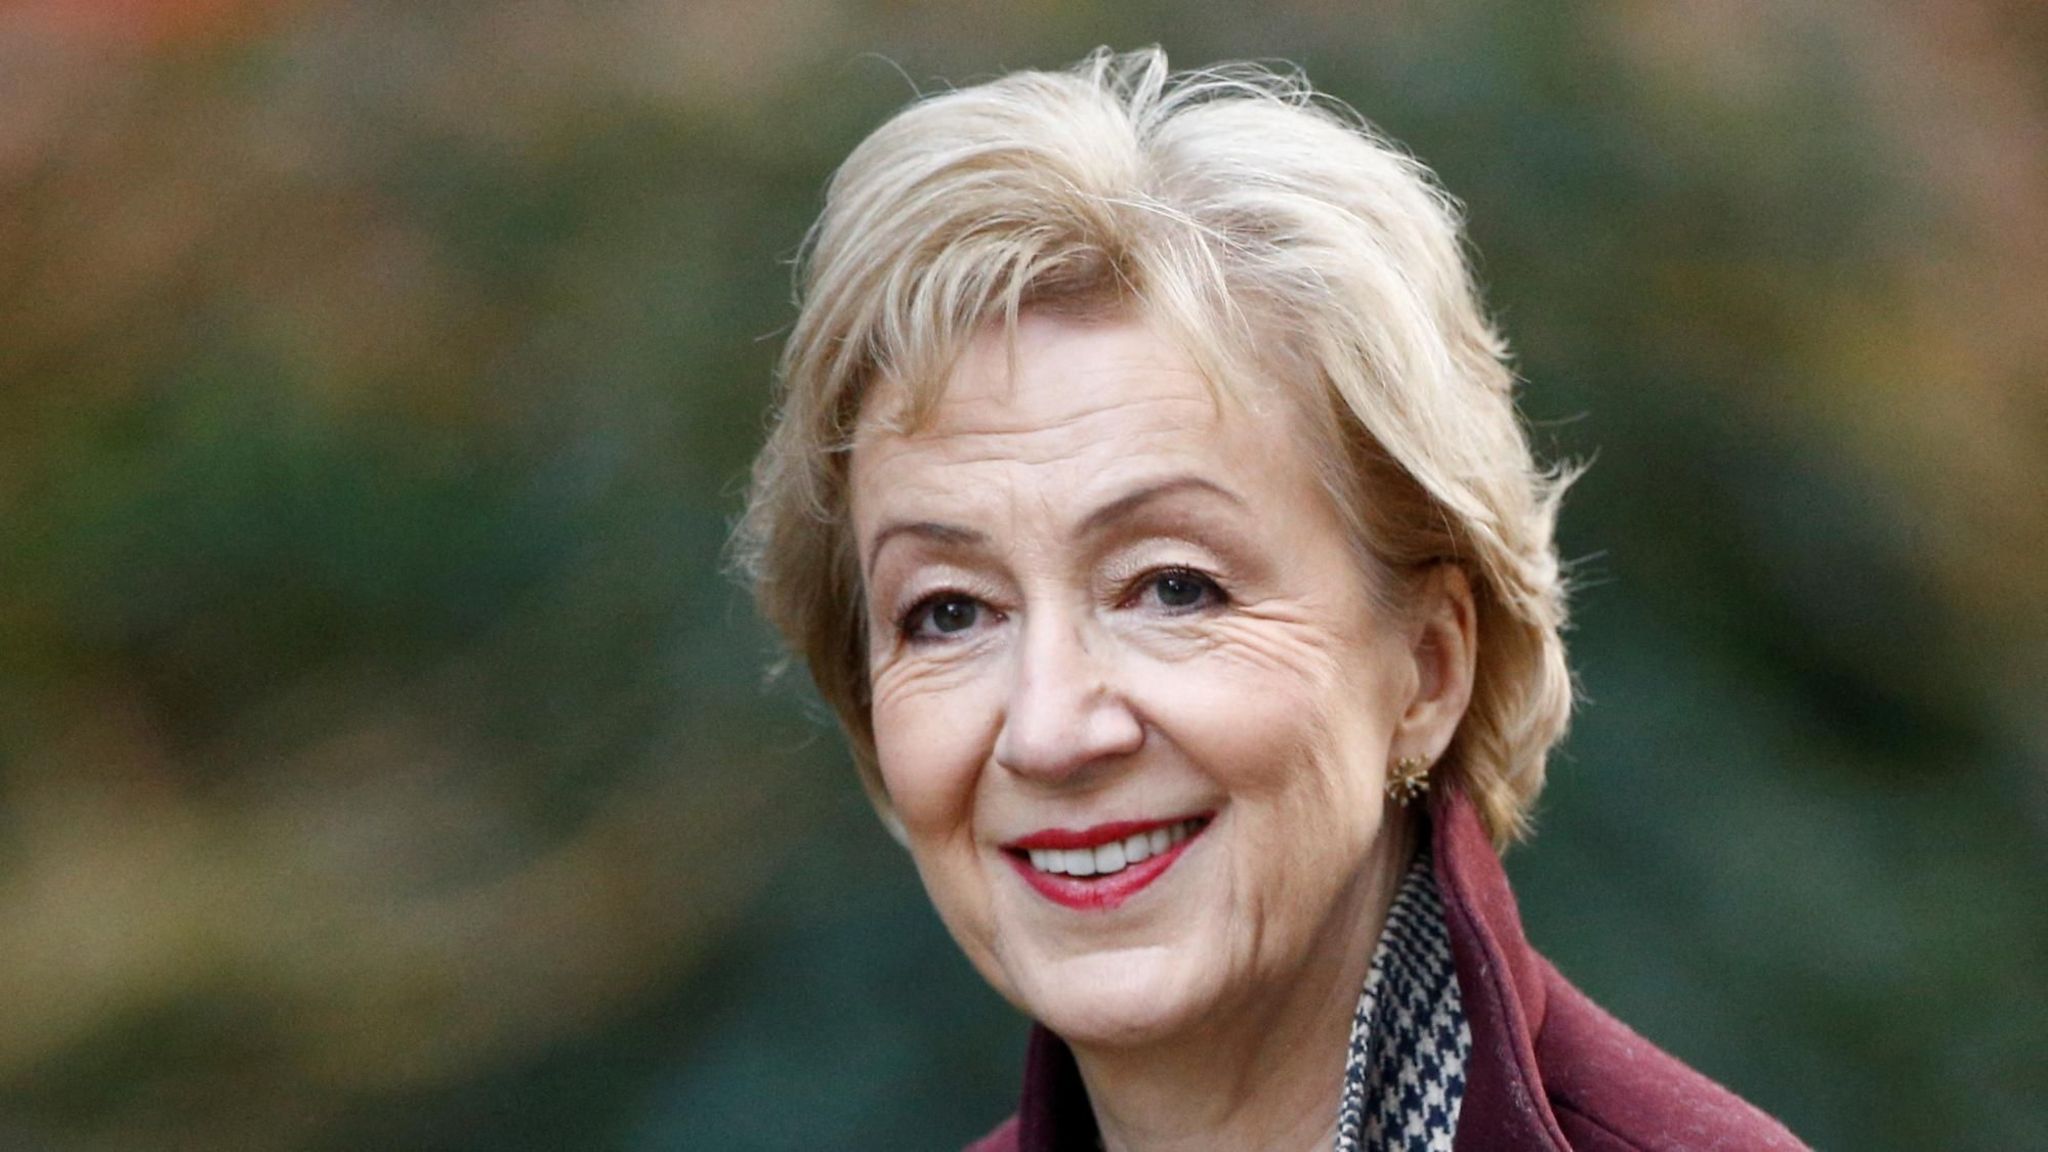 Dame Andrea Leadsom smiling at the camera